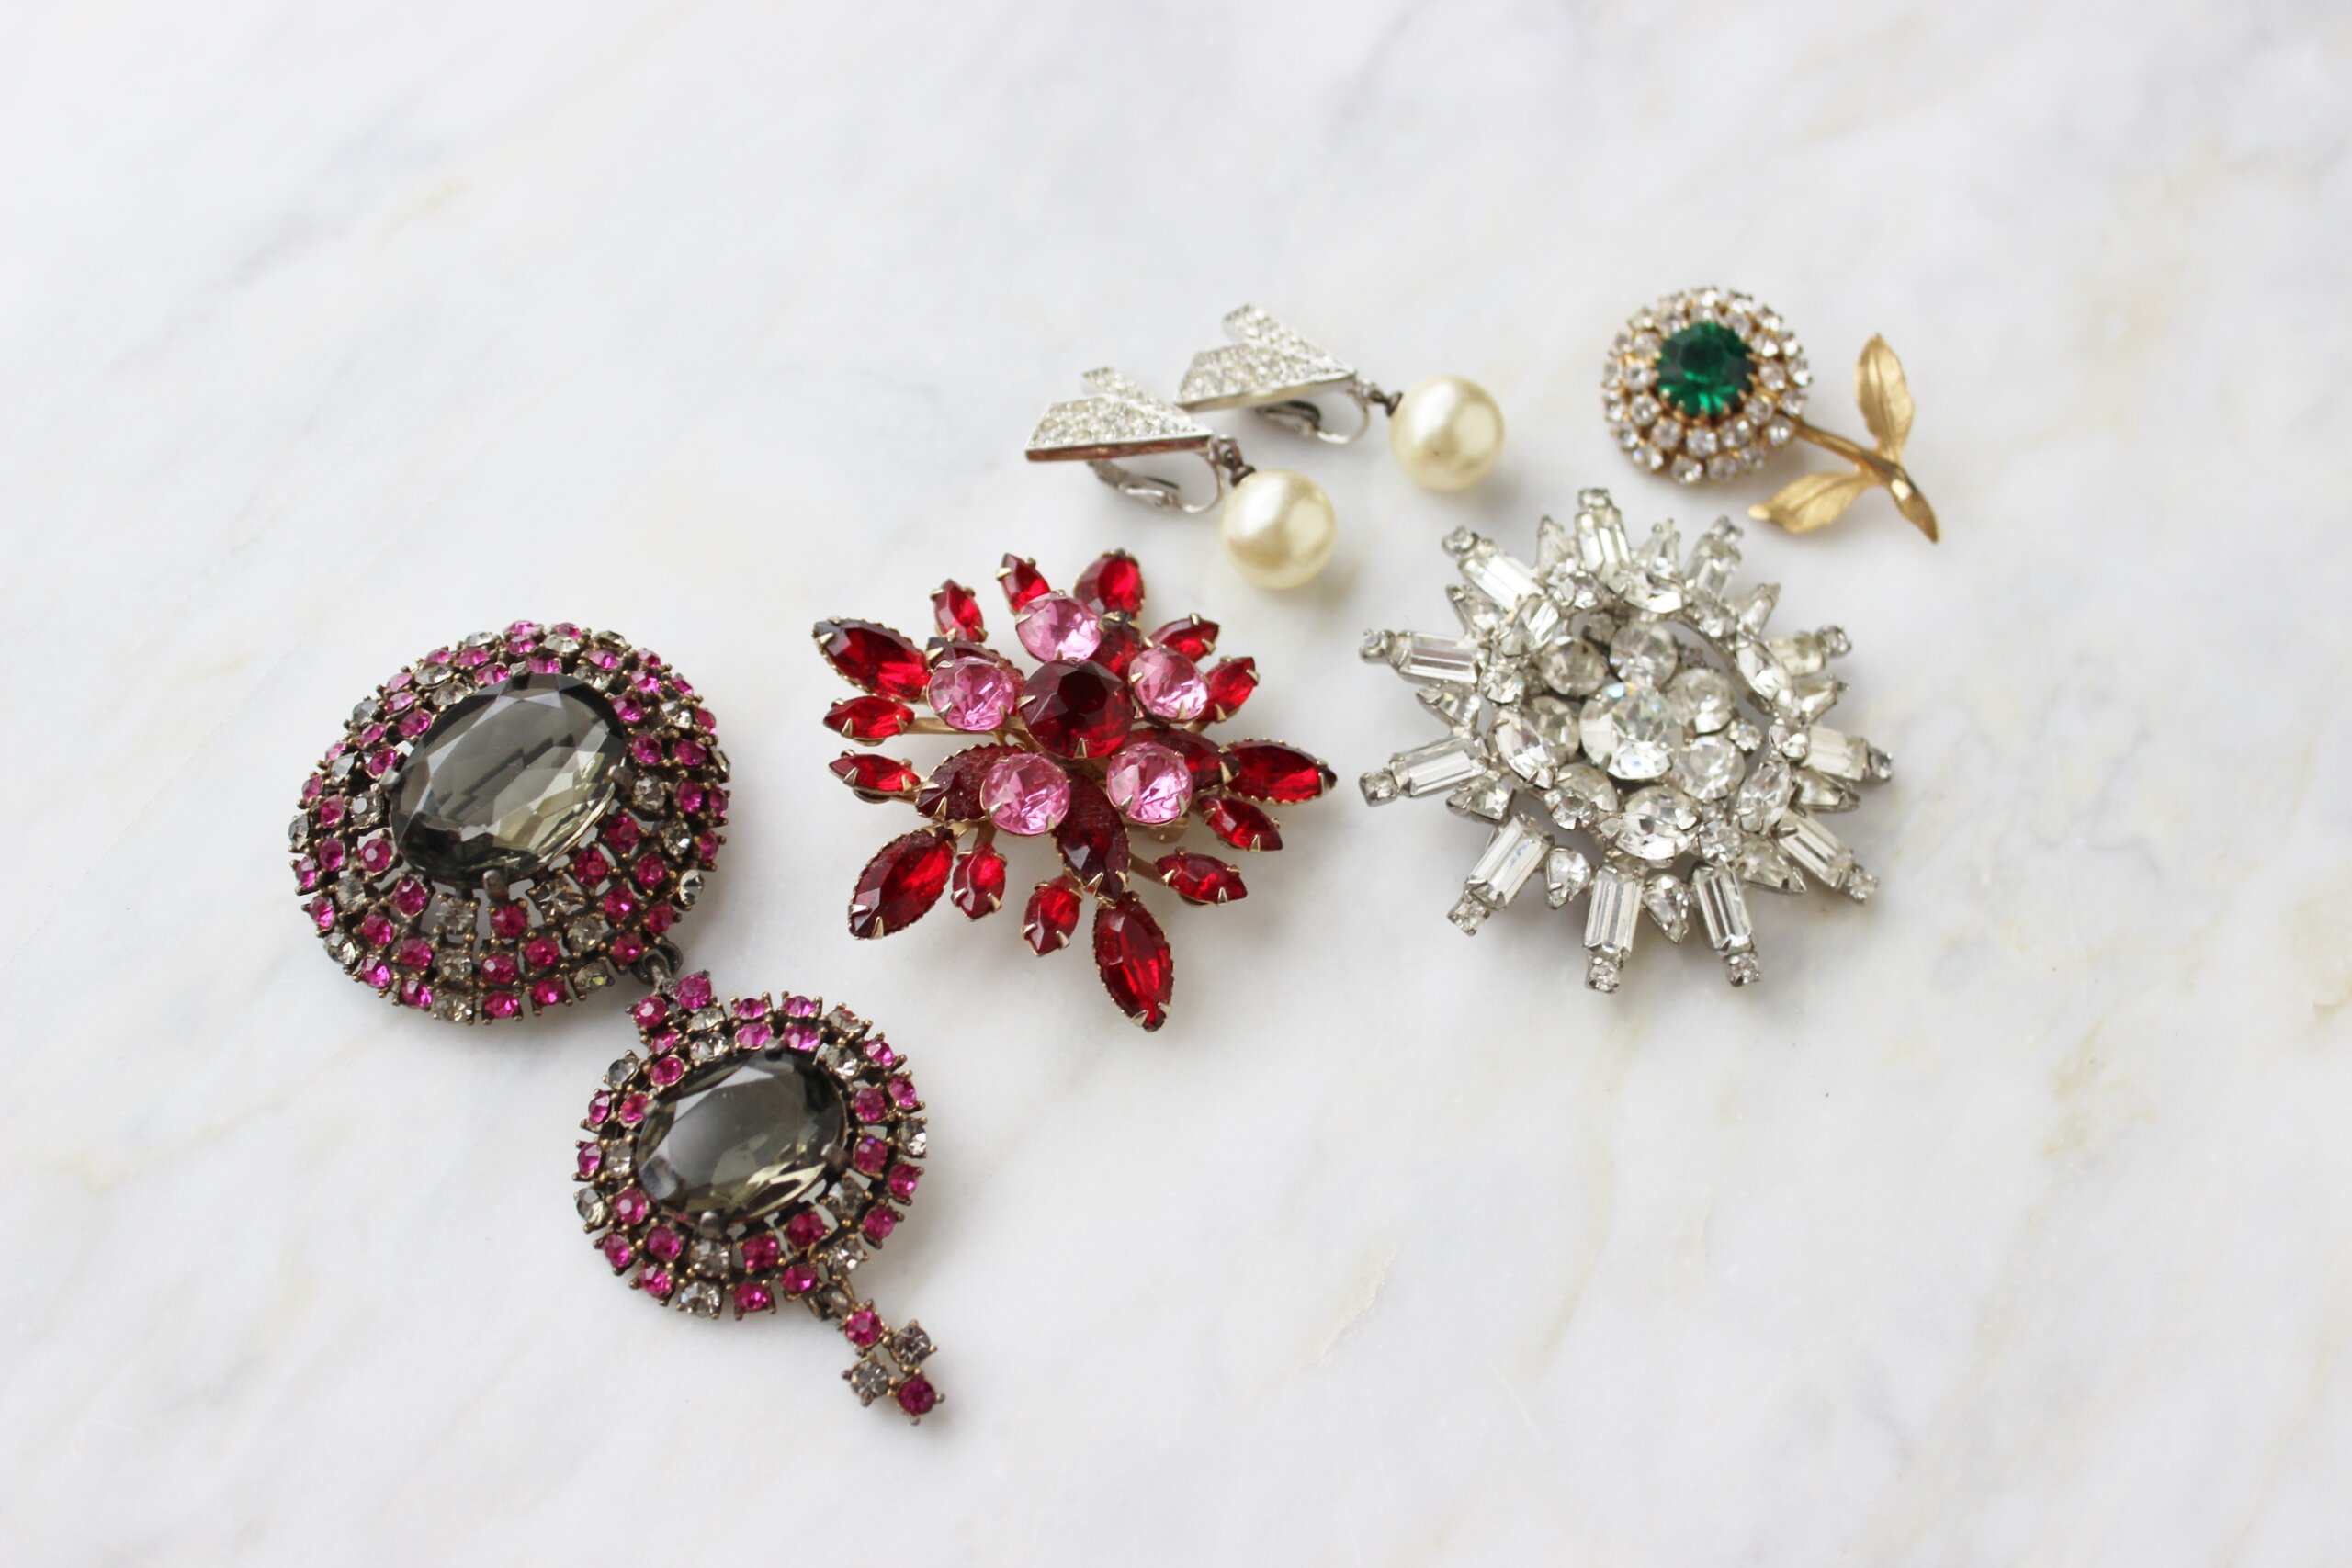 How To Wear A Brooch: Why the brooch is queen of the jewelry box